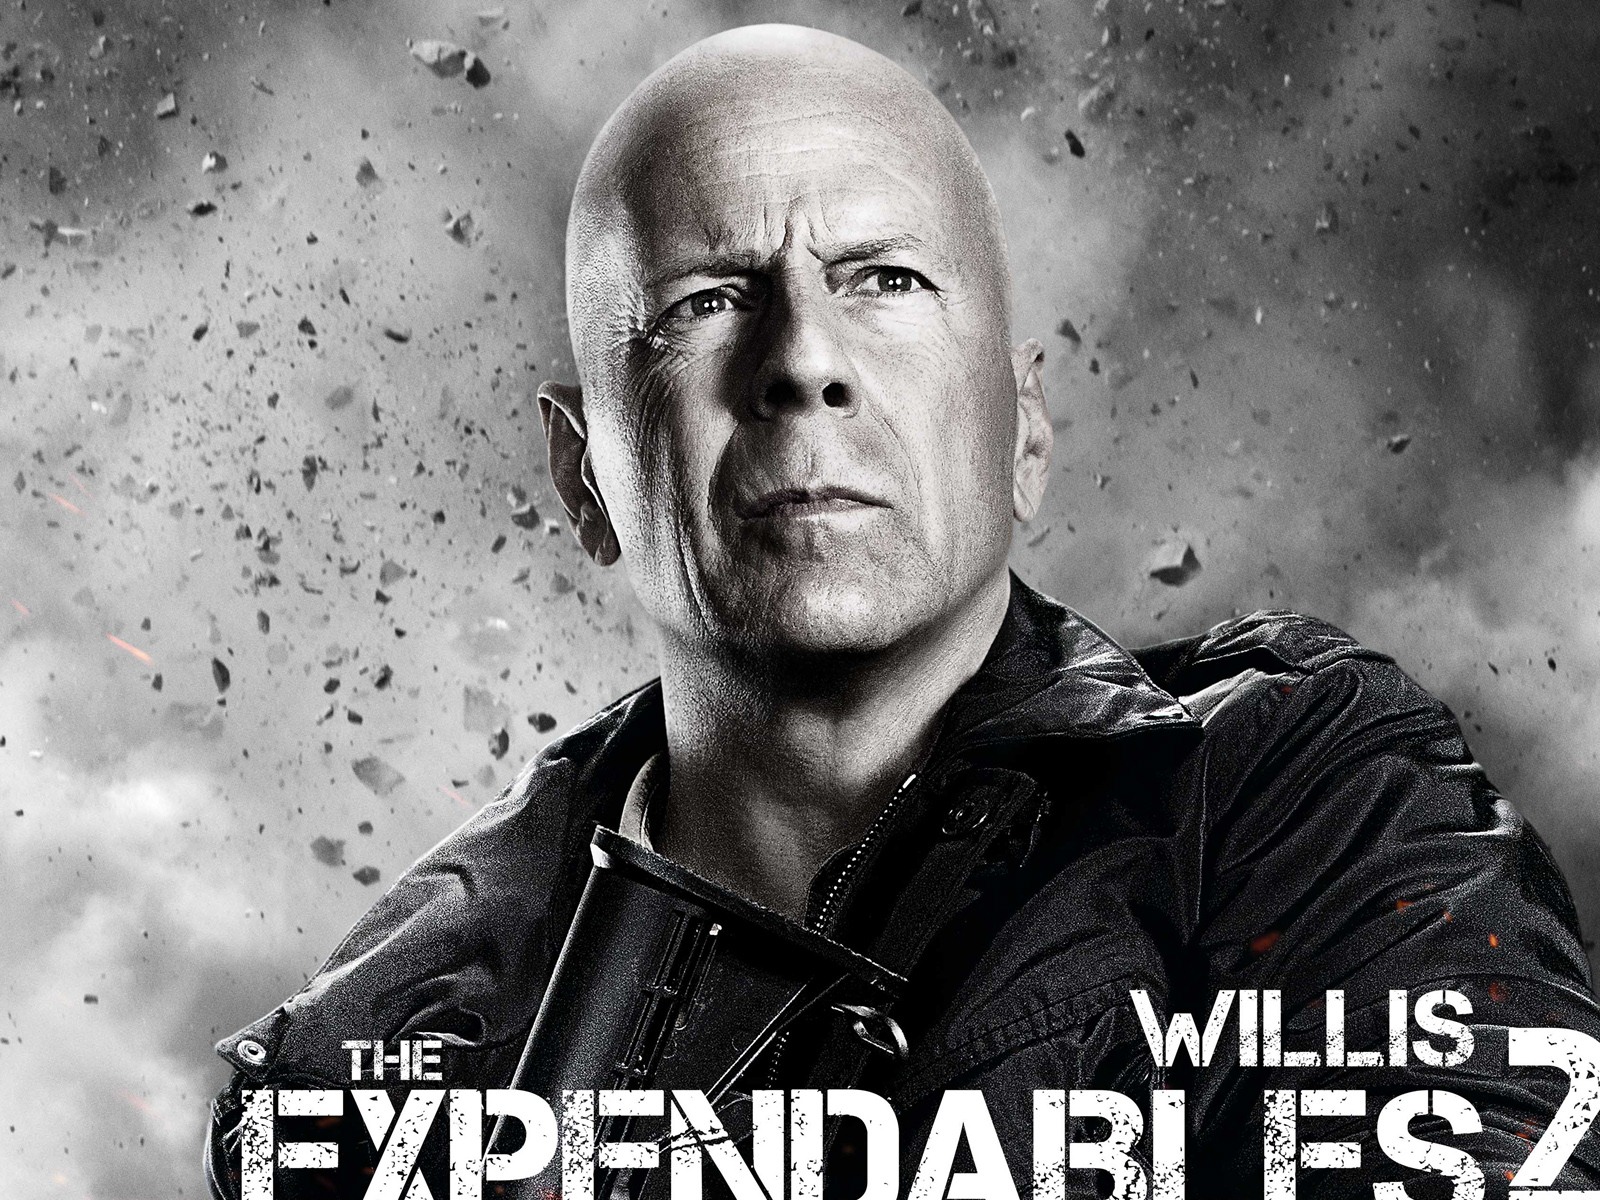 2012 The Expendables 2 敢死队2 高清壁纸12 - 1600x1200